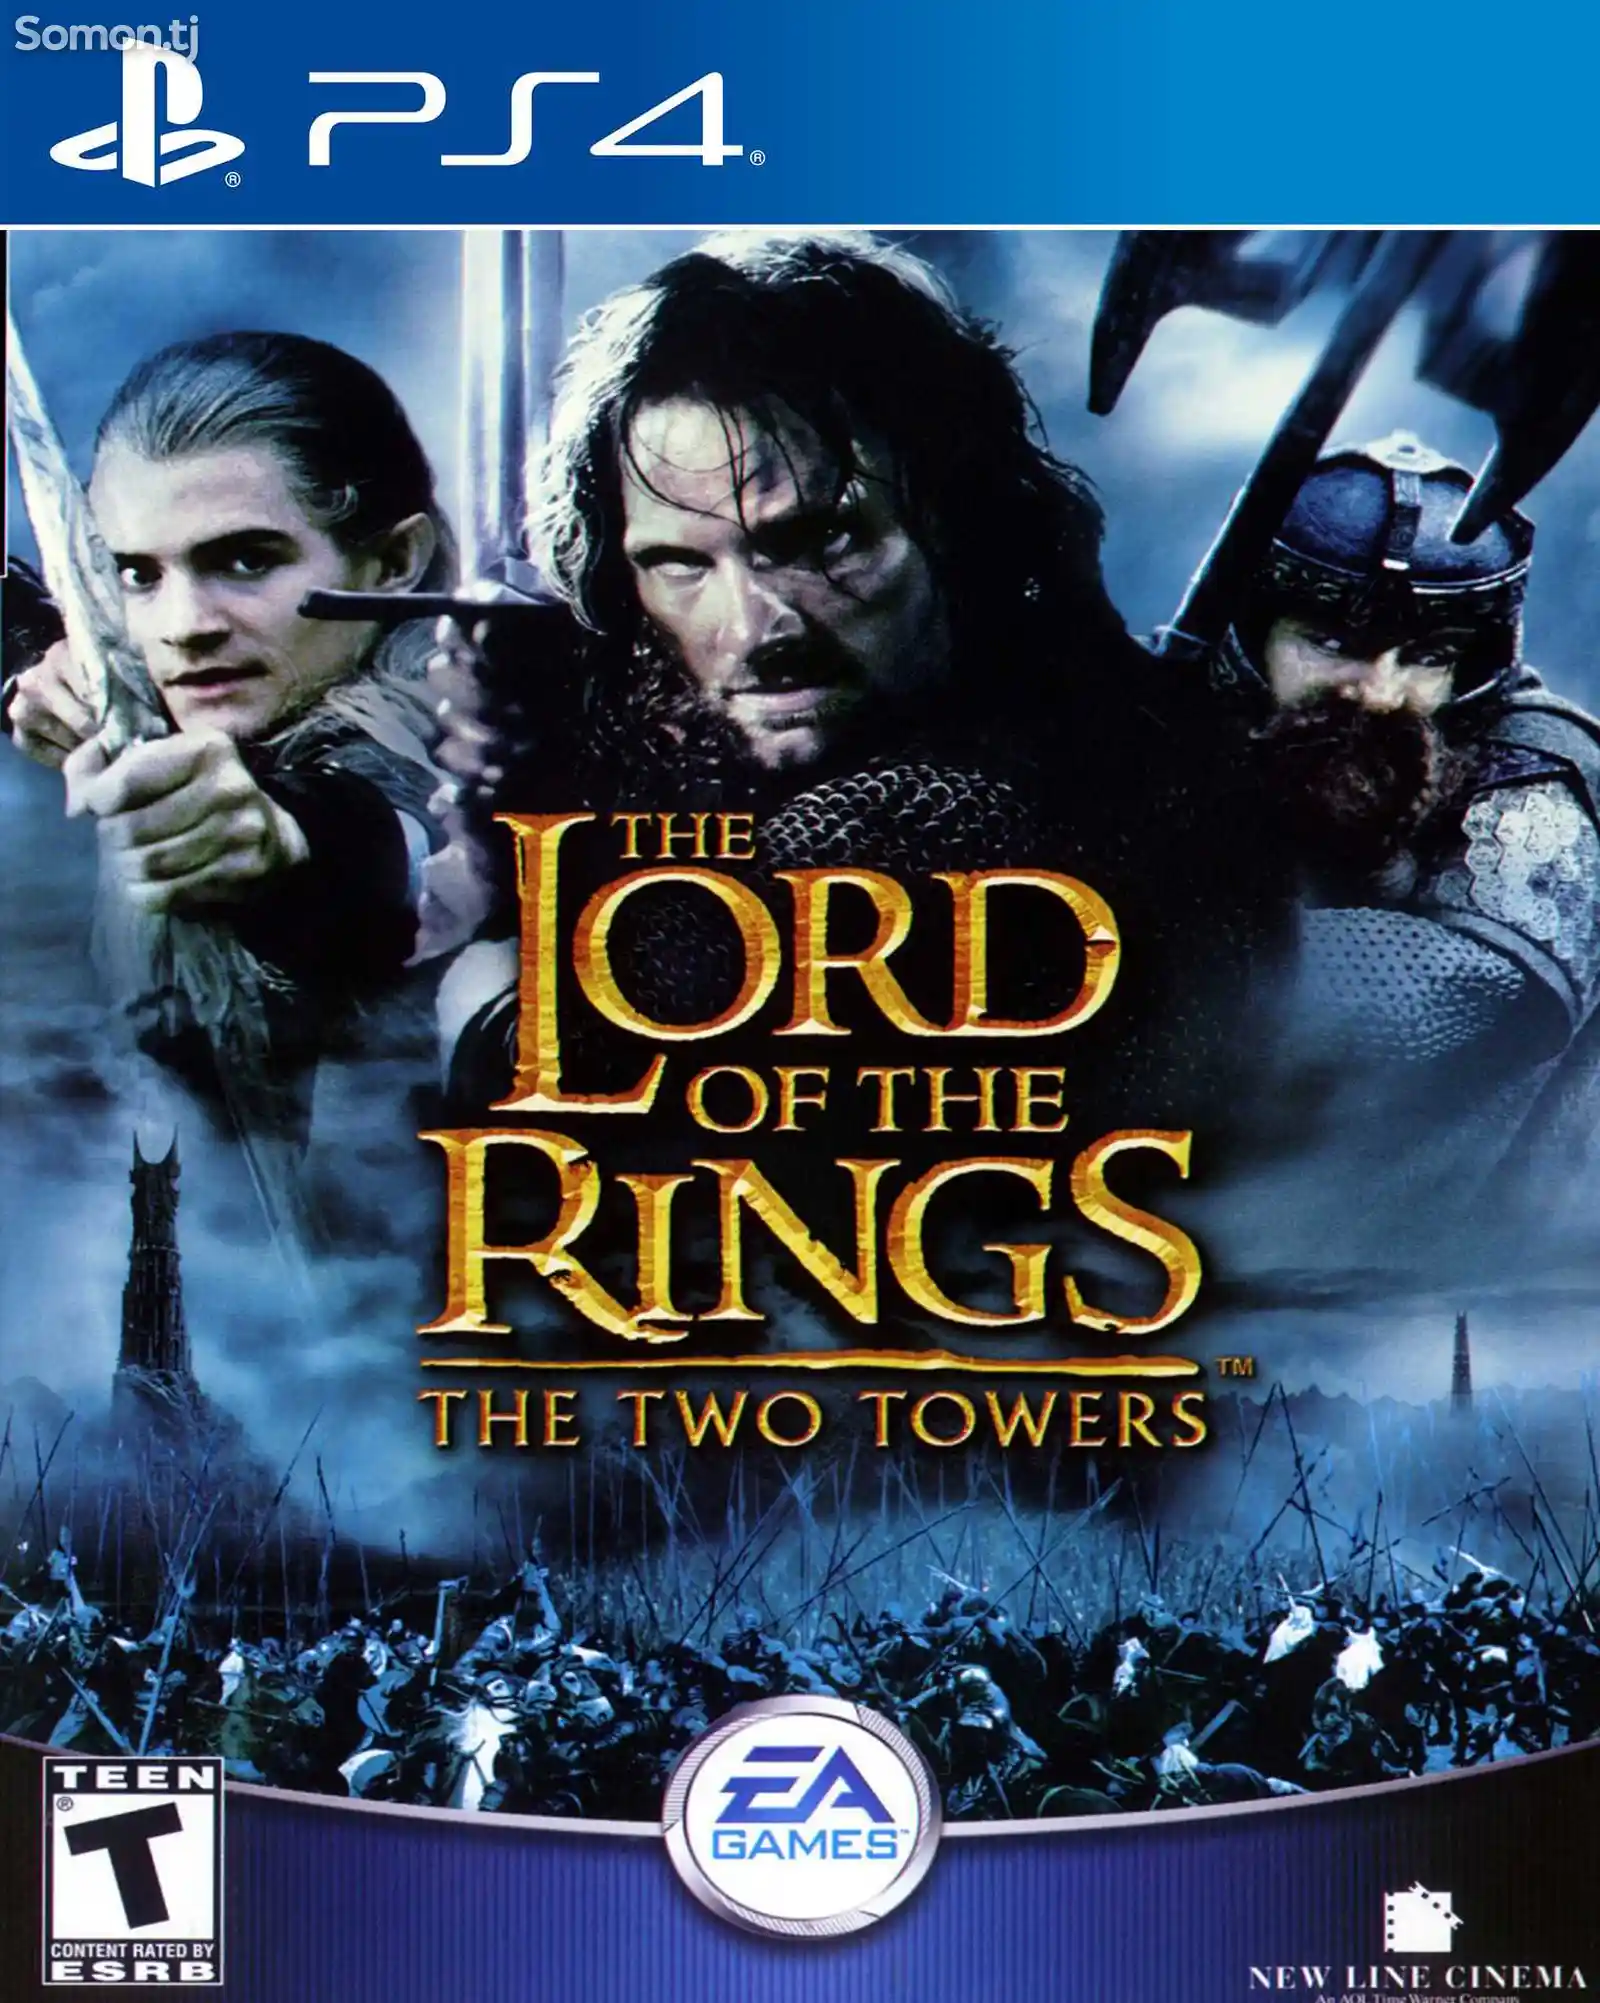 Игра The lord of the rings the two towers для PS-4 / 5.05 / 6.72 / 7.02 / 9.00 /-1